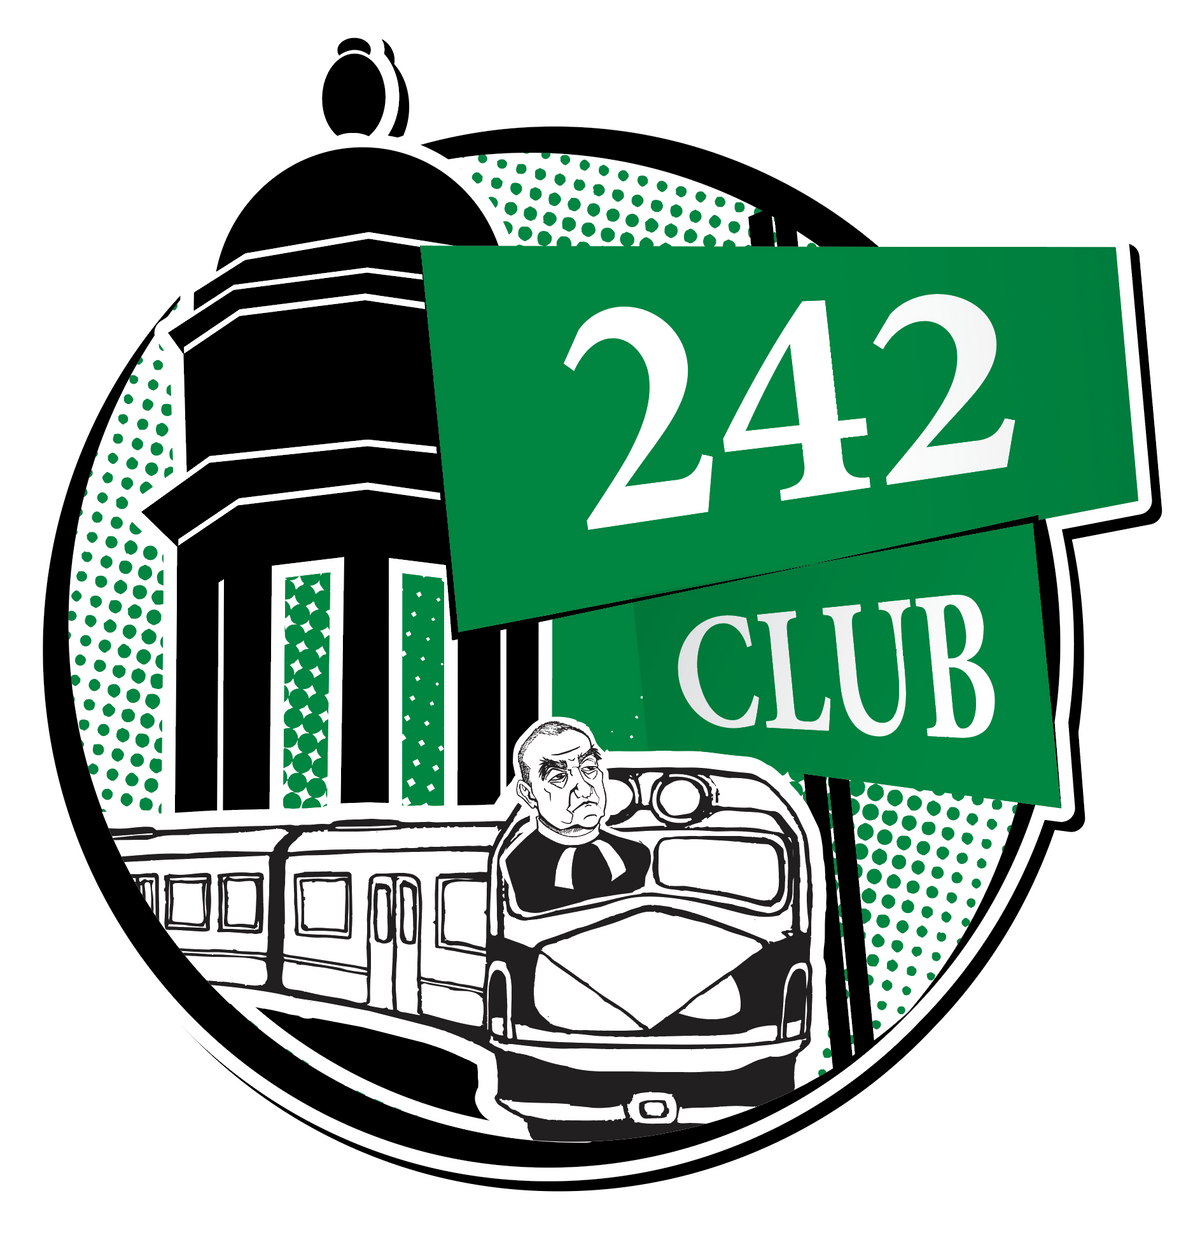 Contribute to the 242 Club!